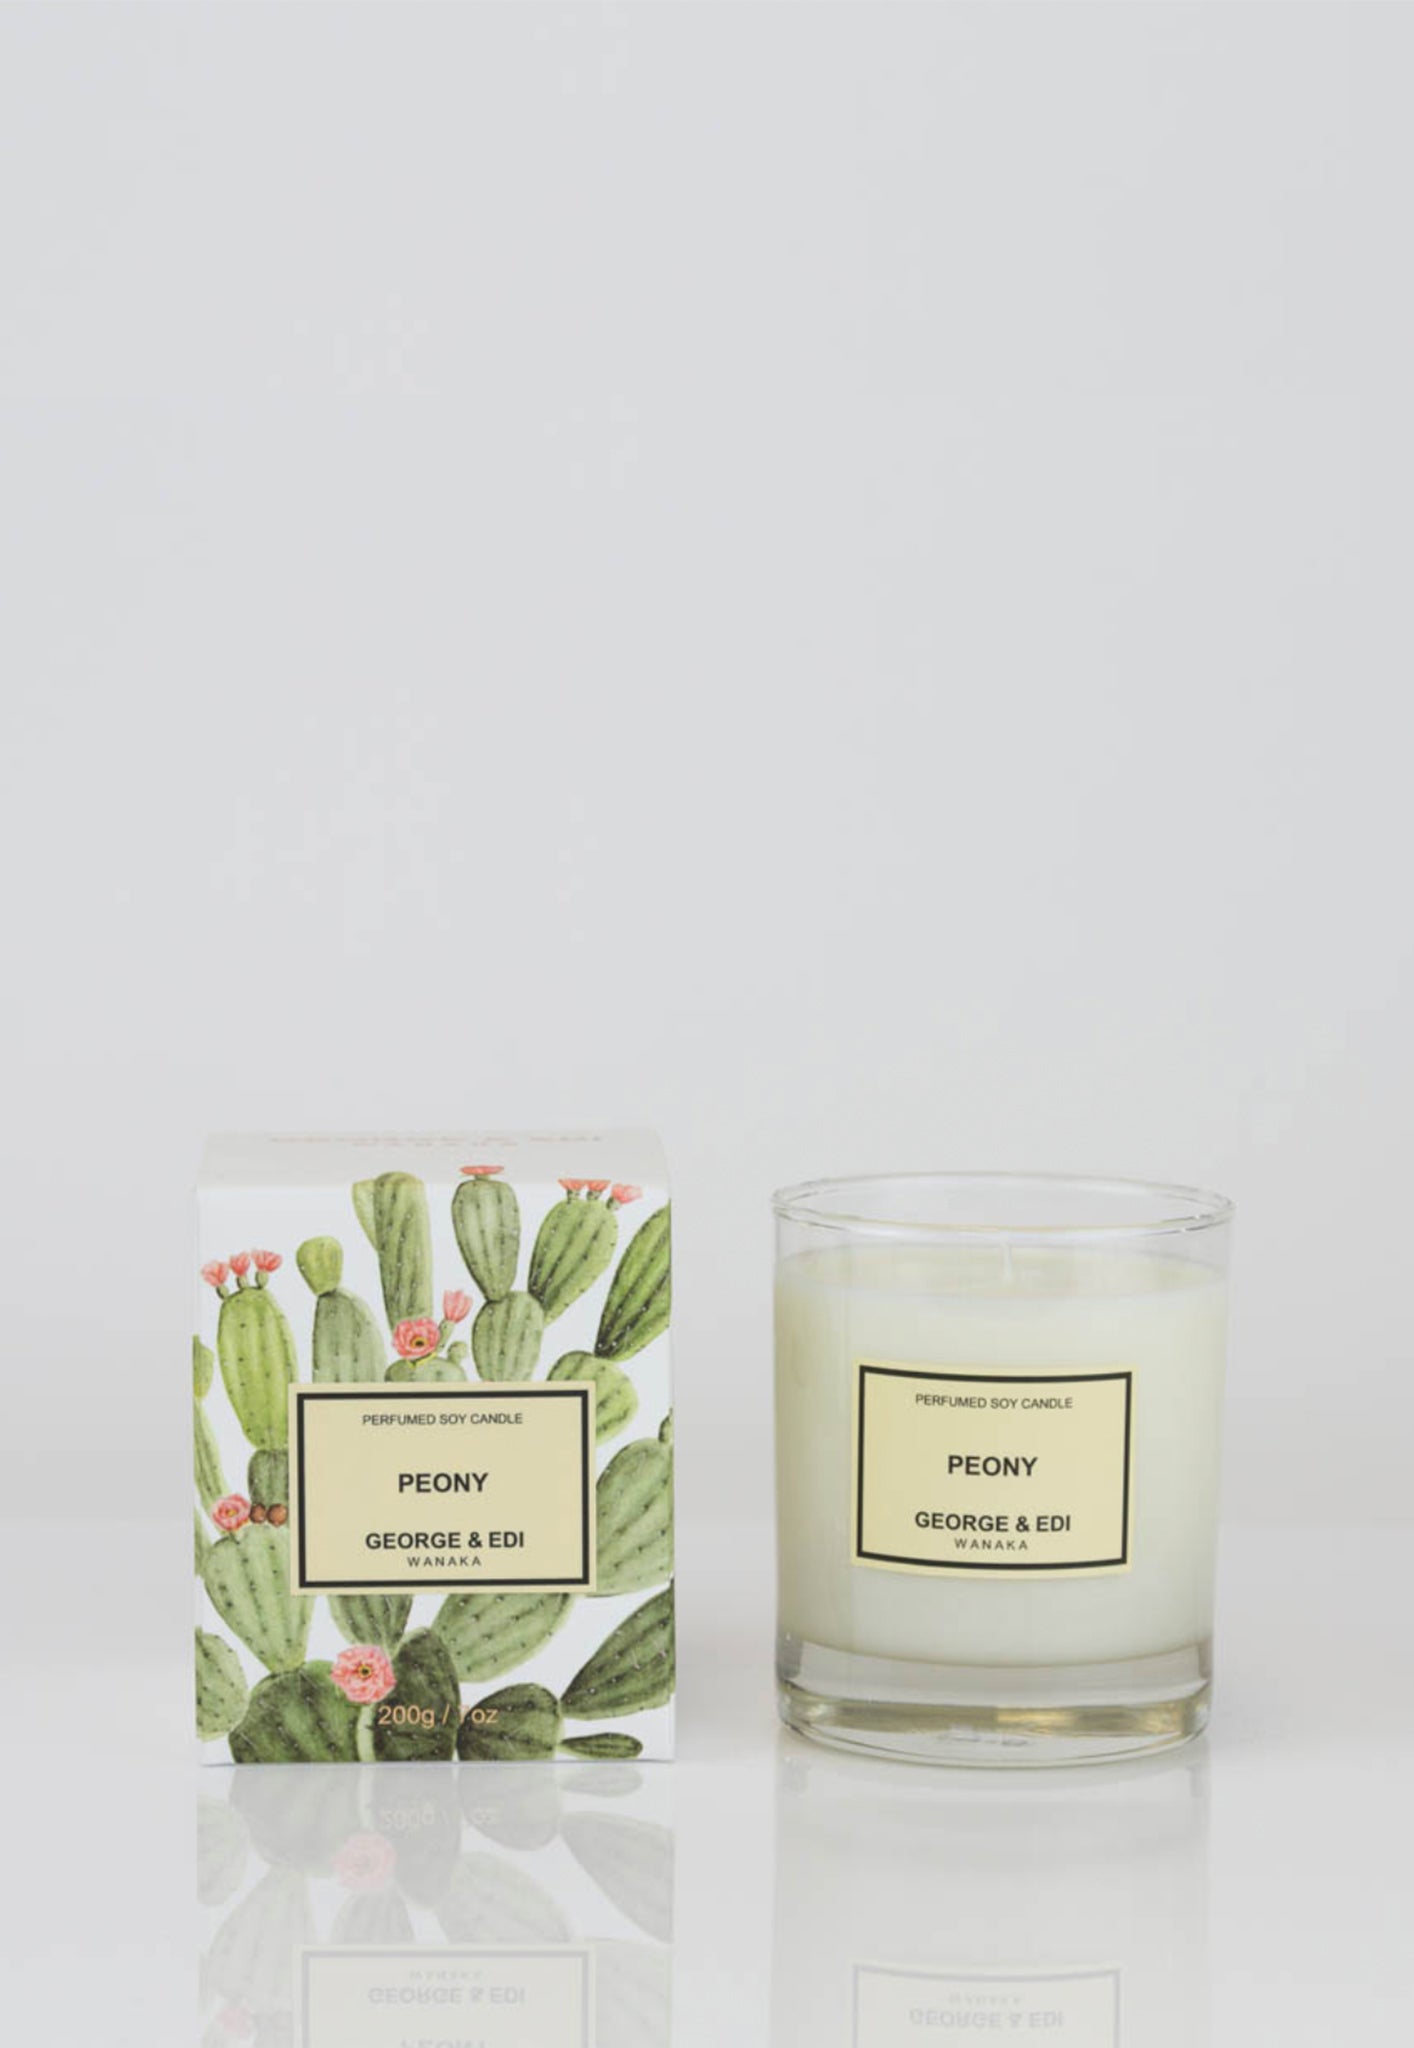 Peony Perfumed Soy Candle sold by Angel Divine